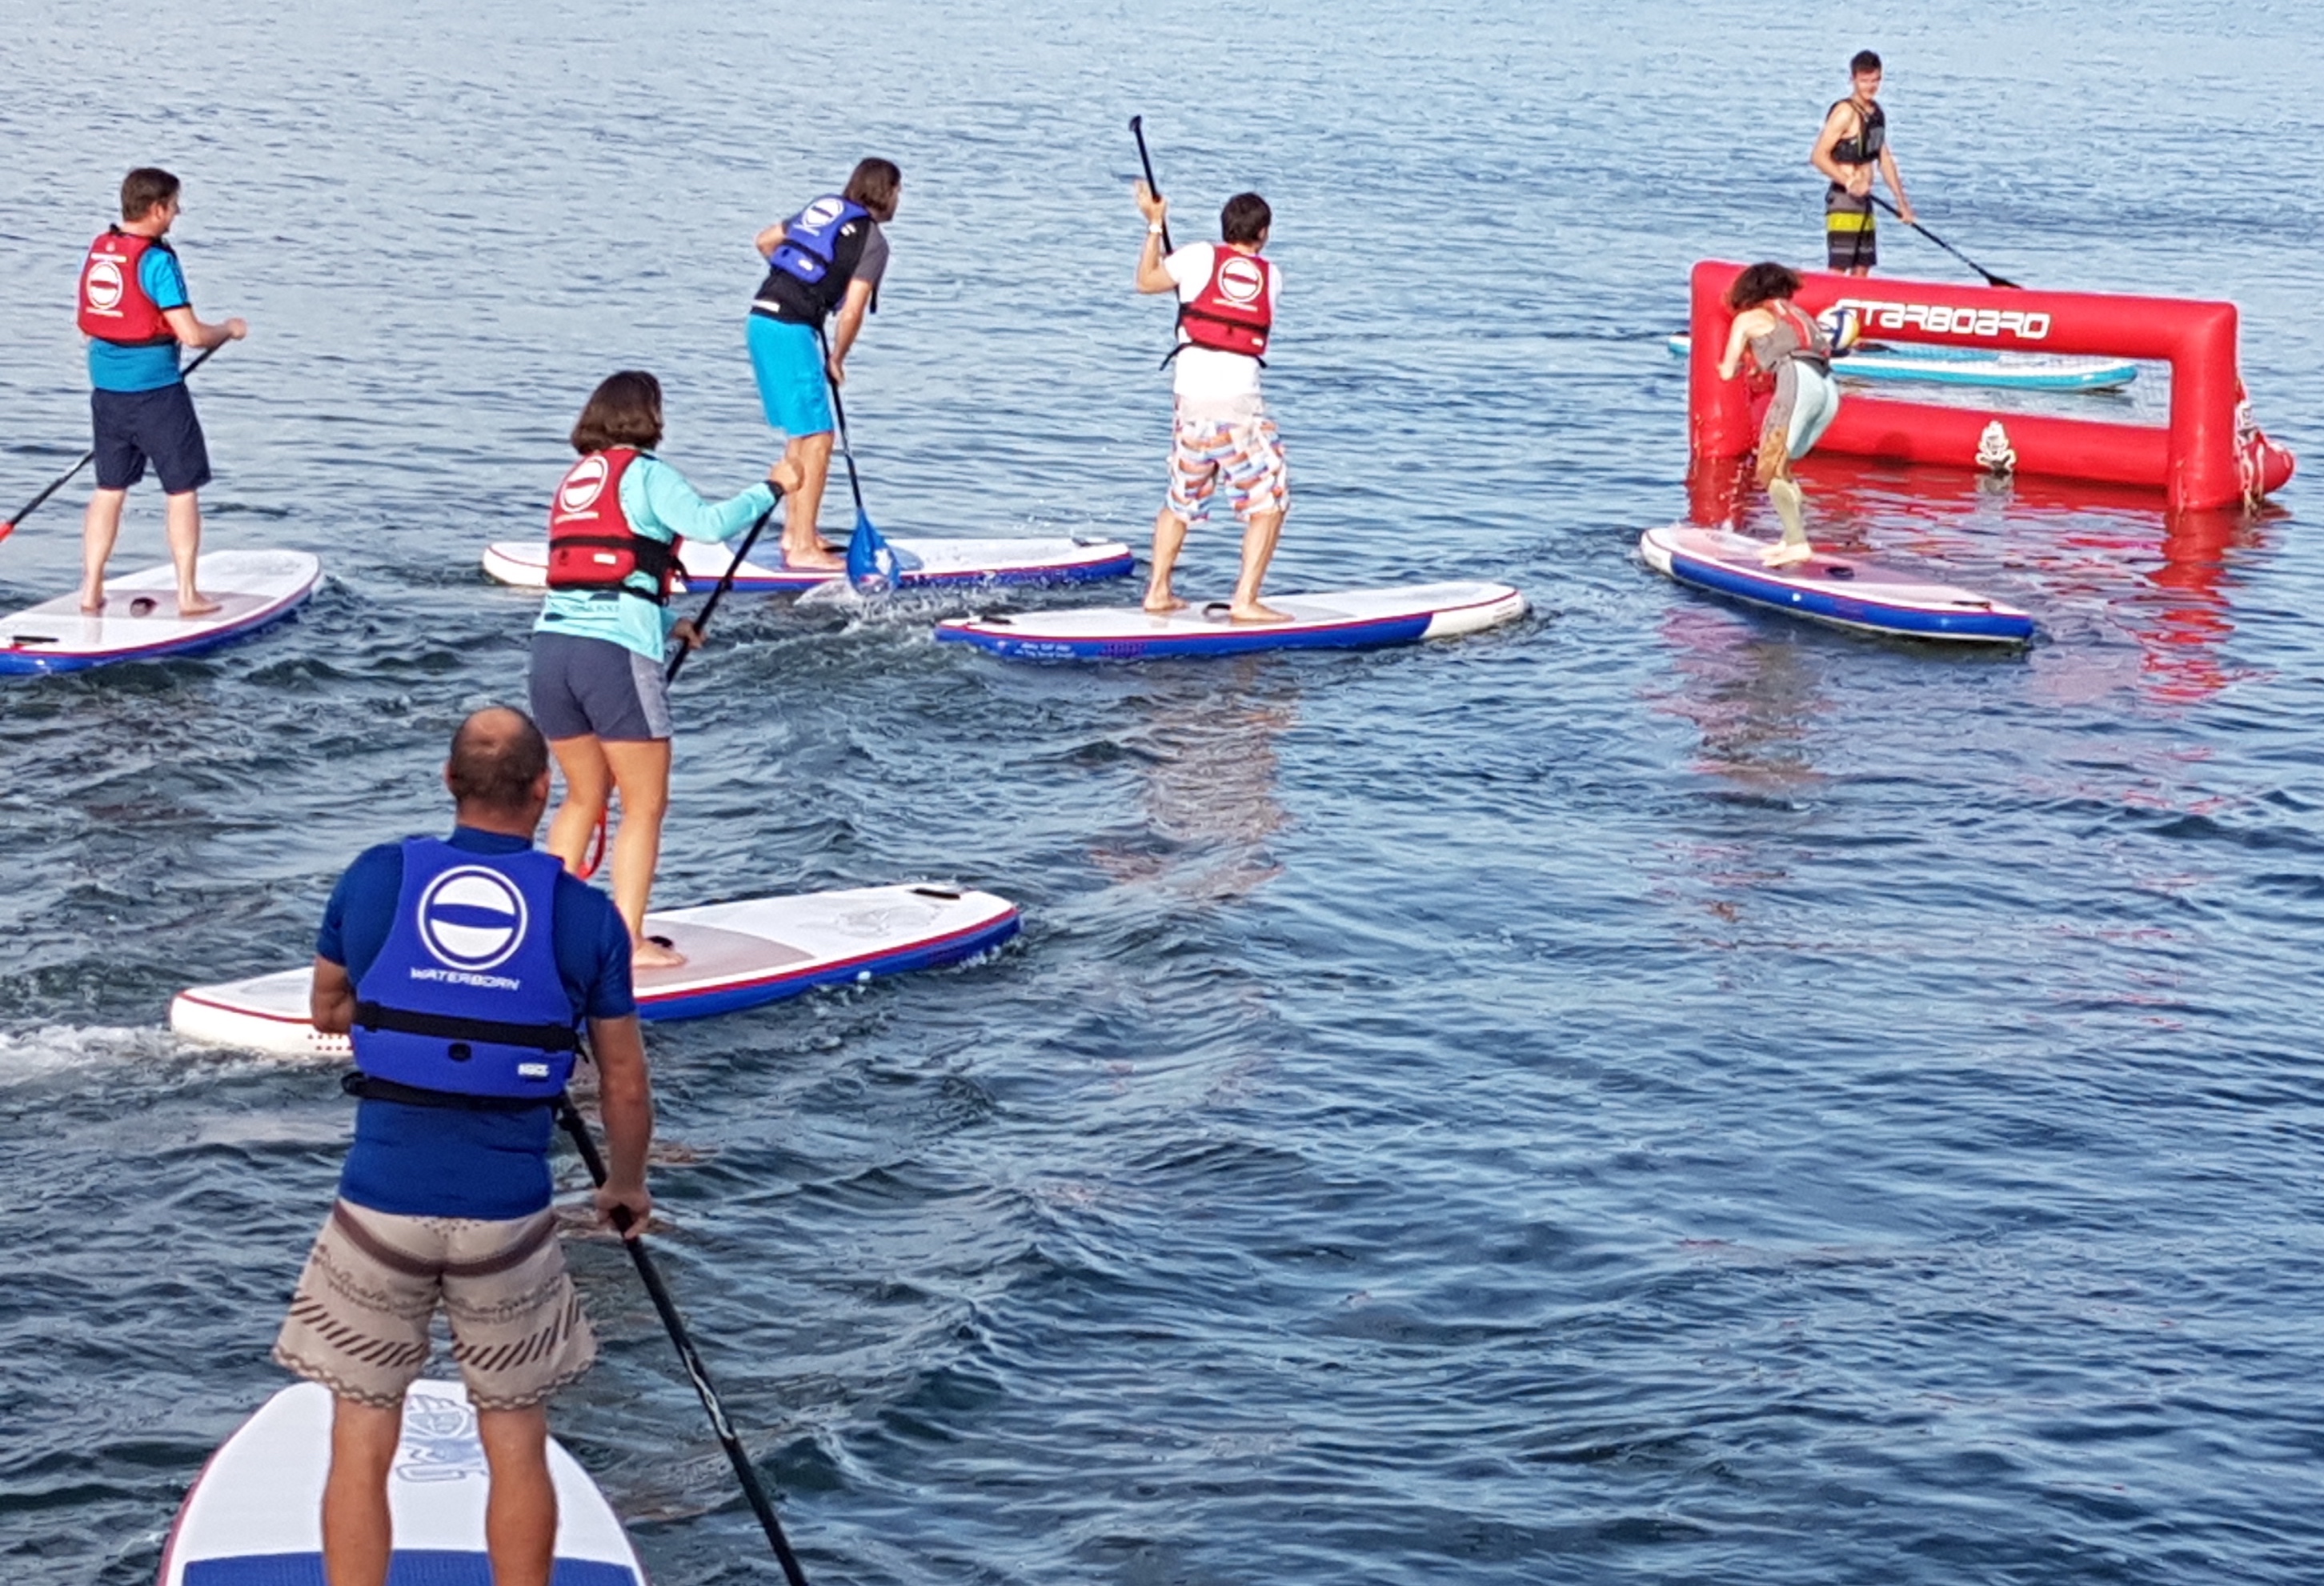 Group SUP water polo paddle boarding with Waterborn SUP